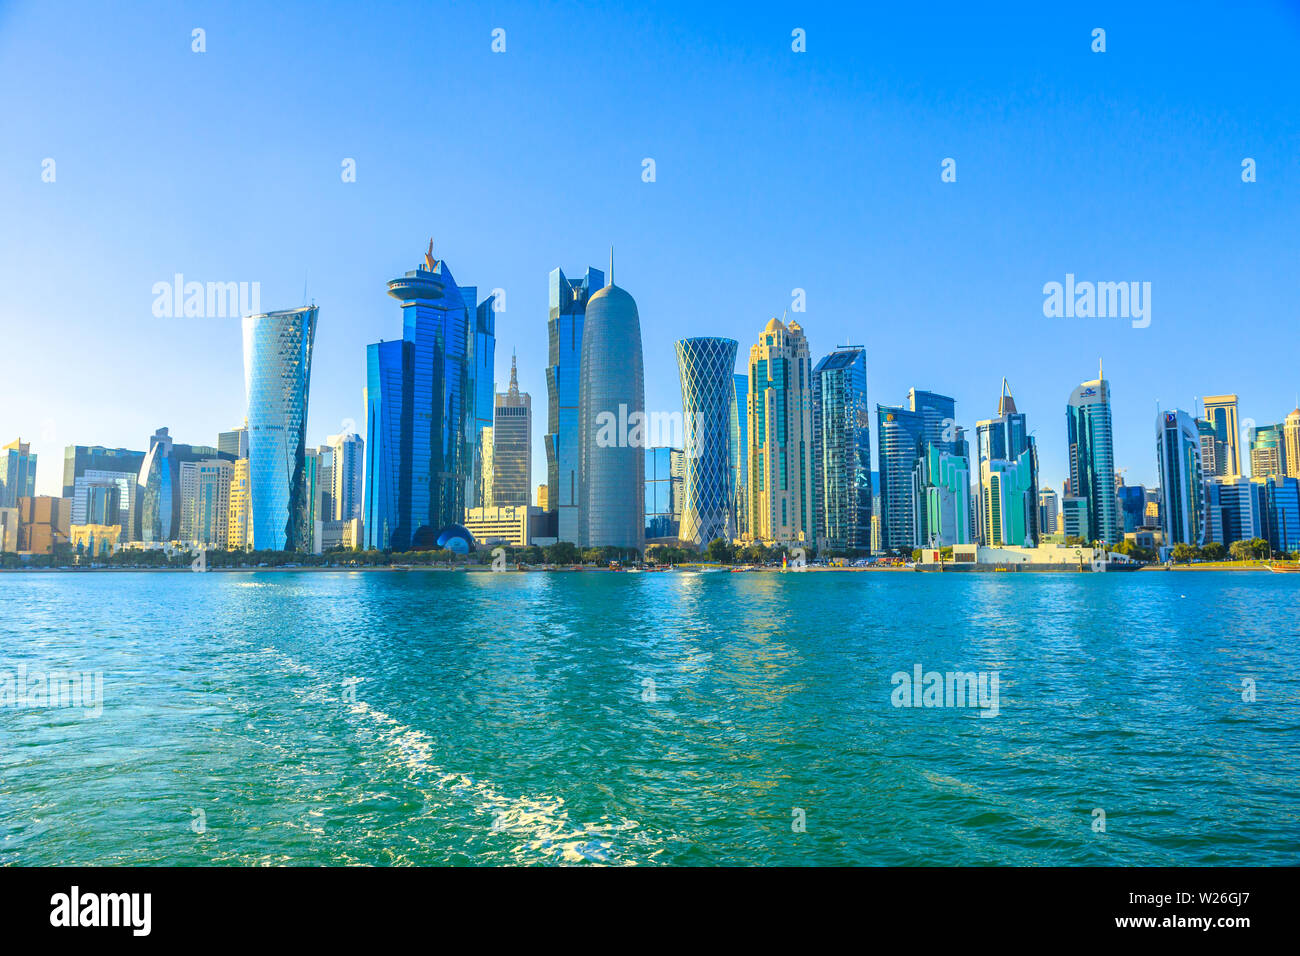 Doha, Qatar - February 20, 2019: Qatar International Exhibition Center, Doha Tower, Salam Tower, World Trade Center and Doha Bank Tower see from dhow Stock Photo